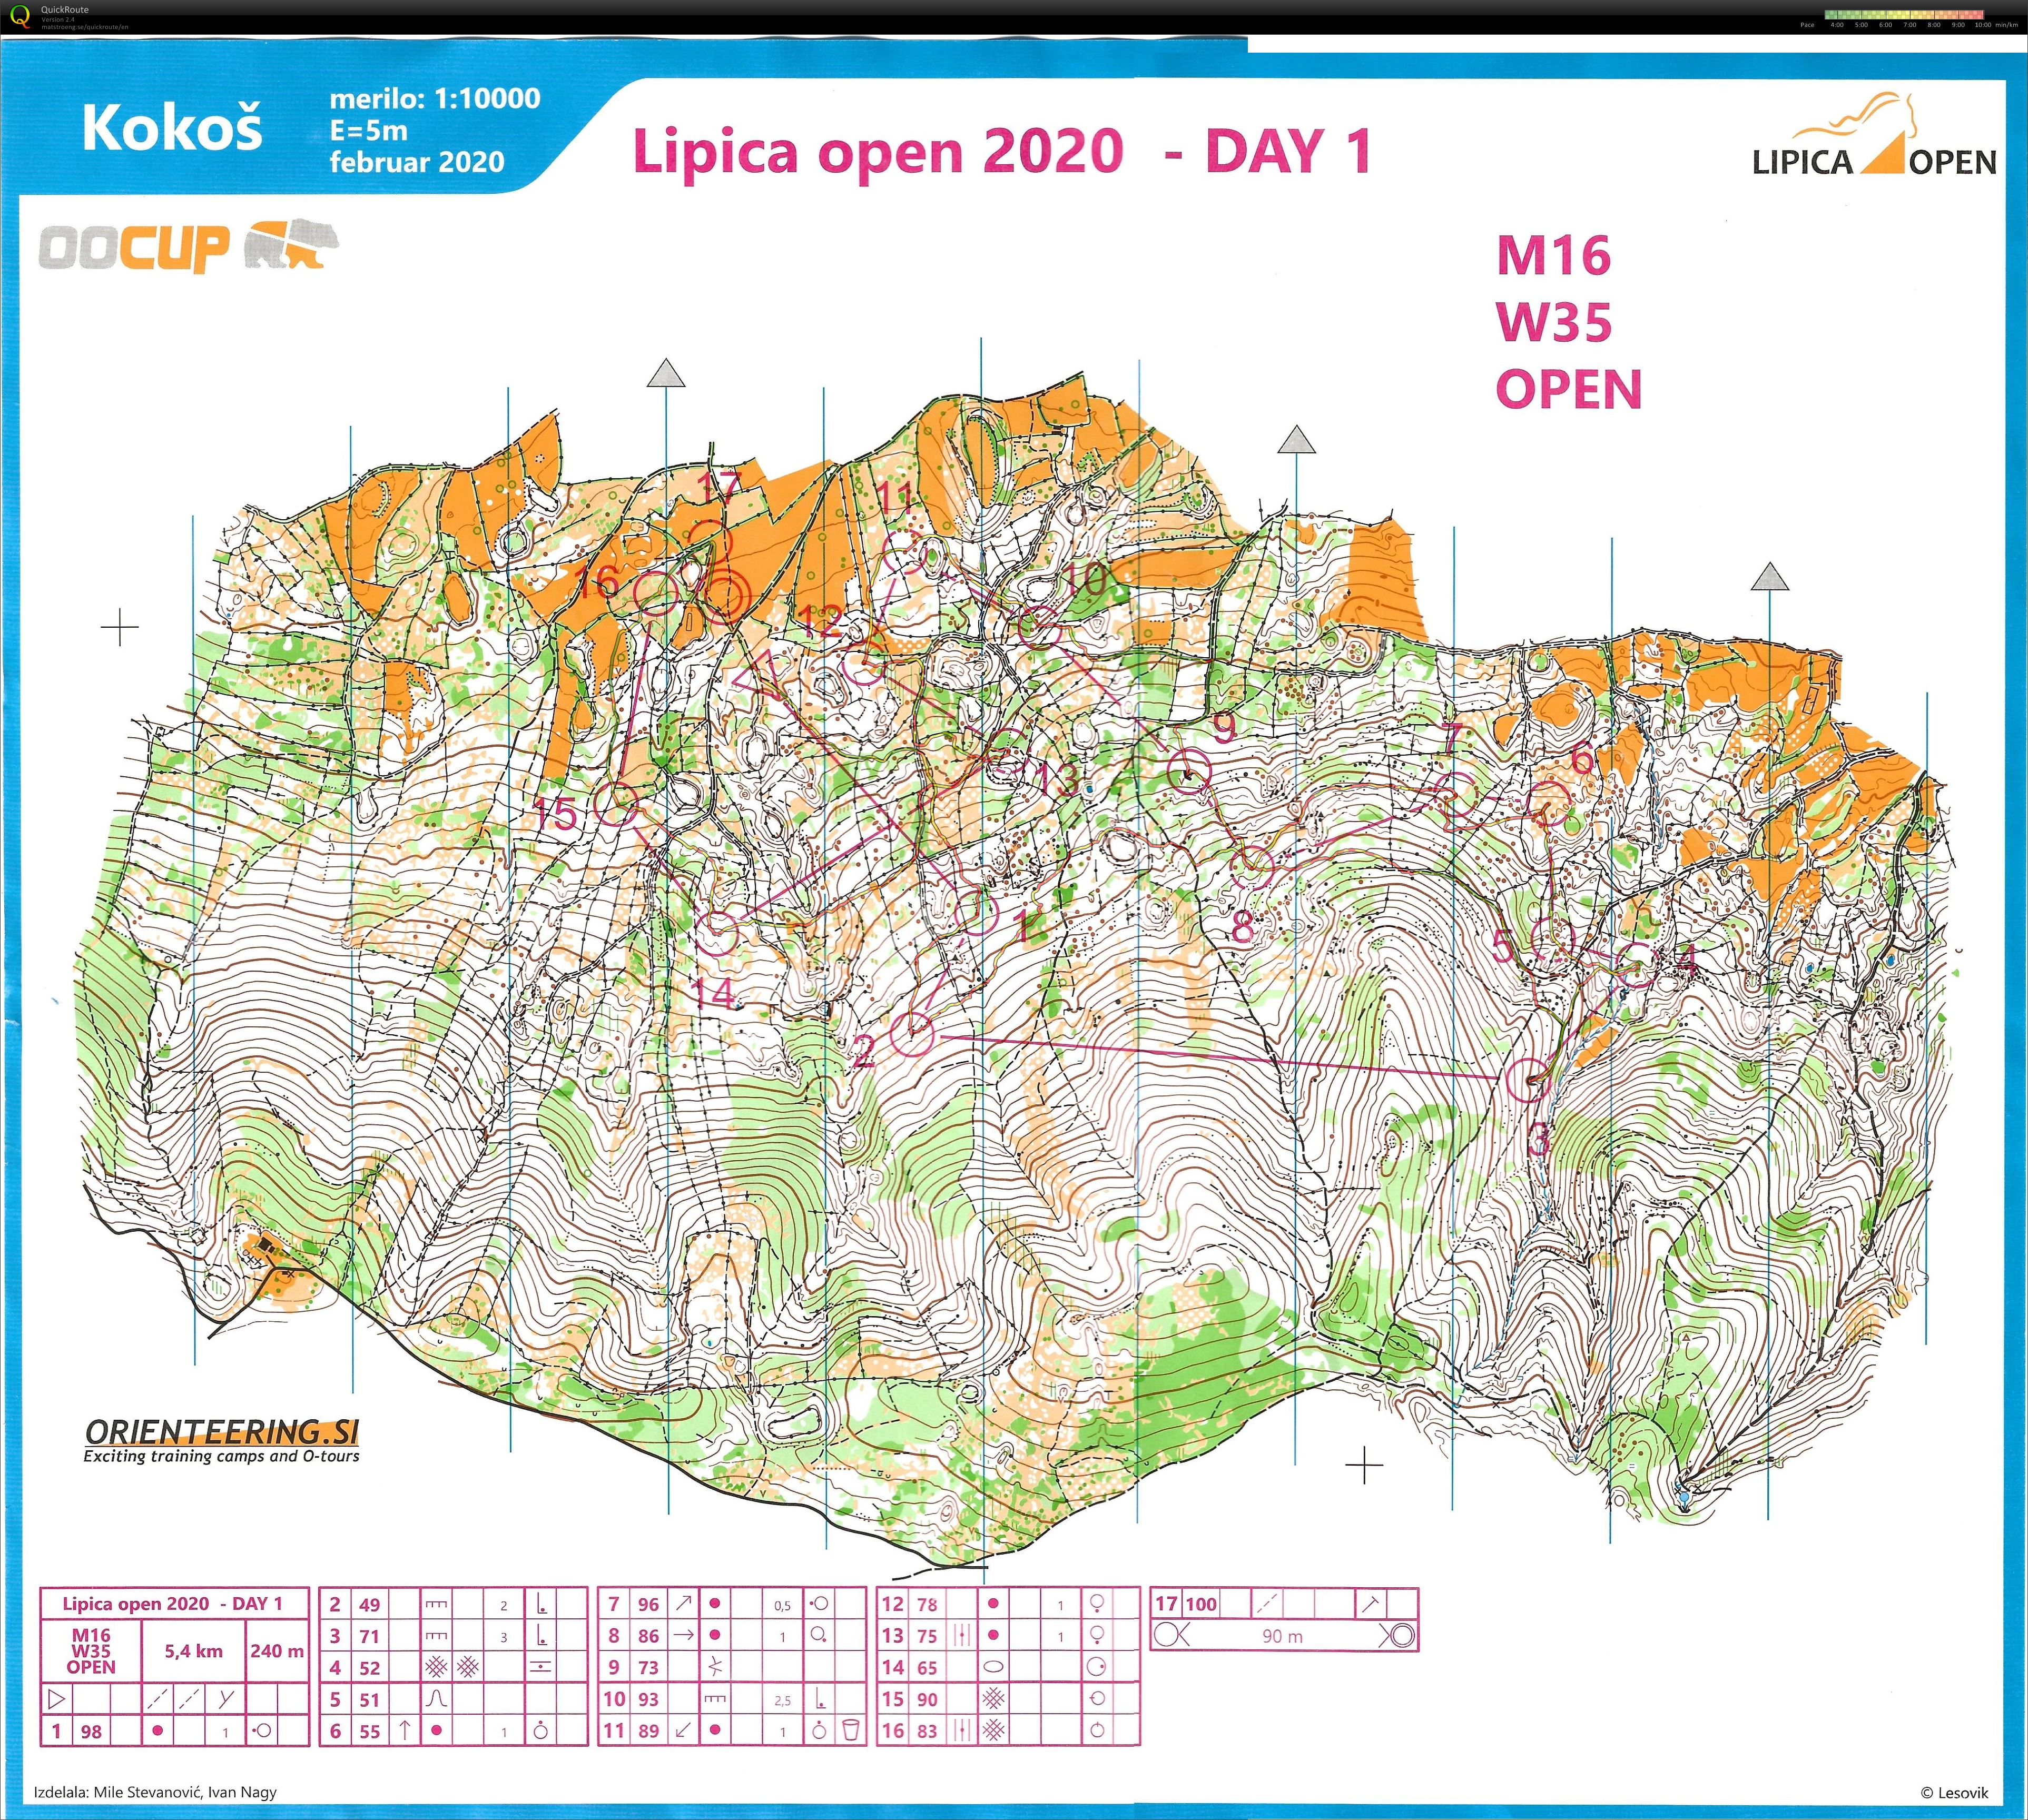 Lipica Open 2020 Day 1 (07.03.2020)